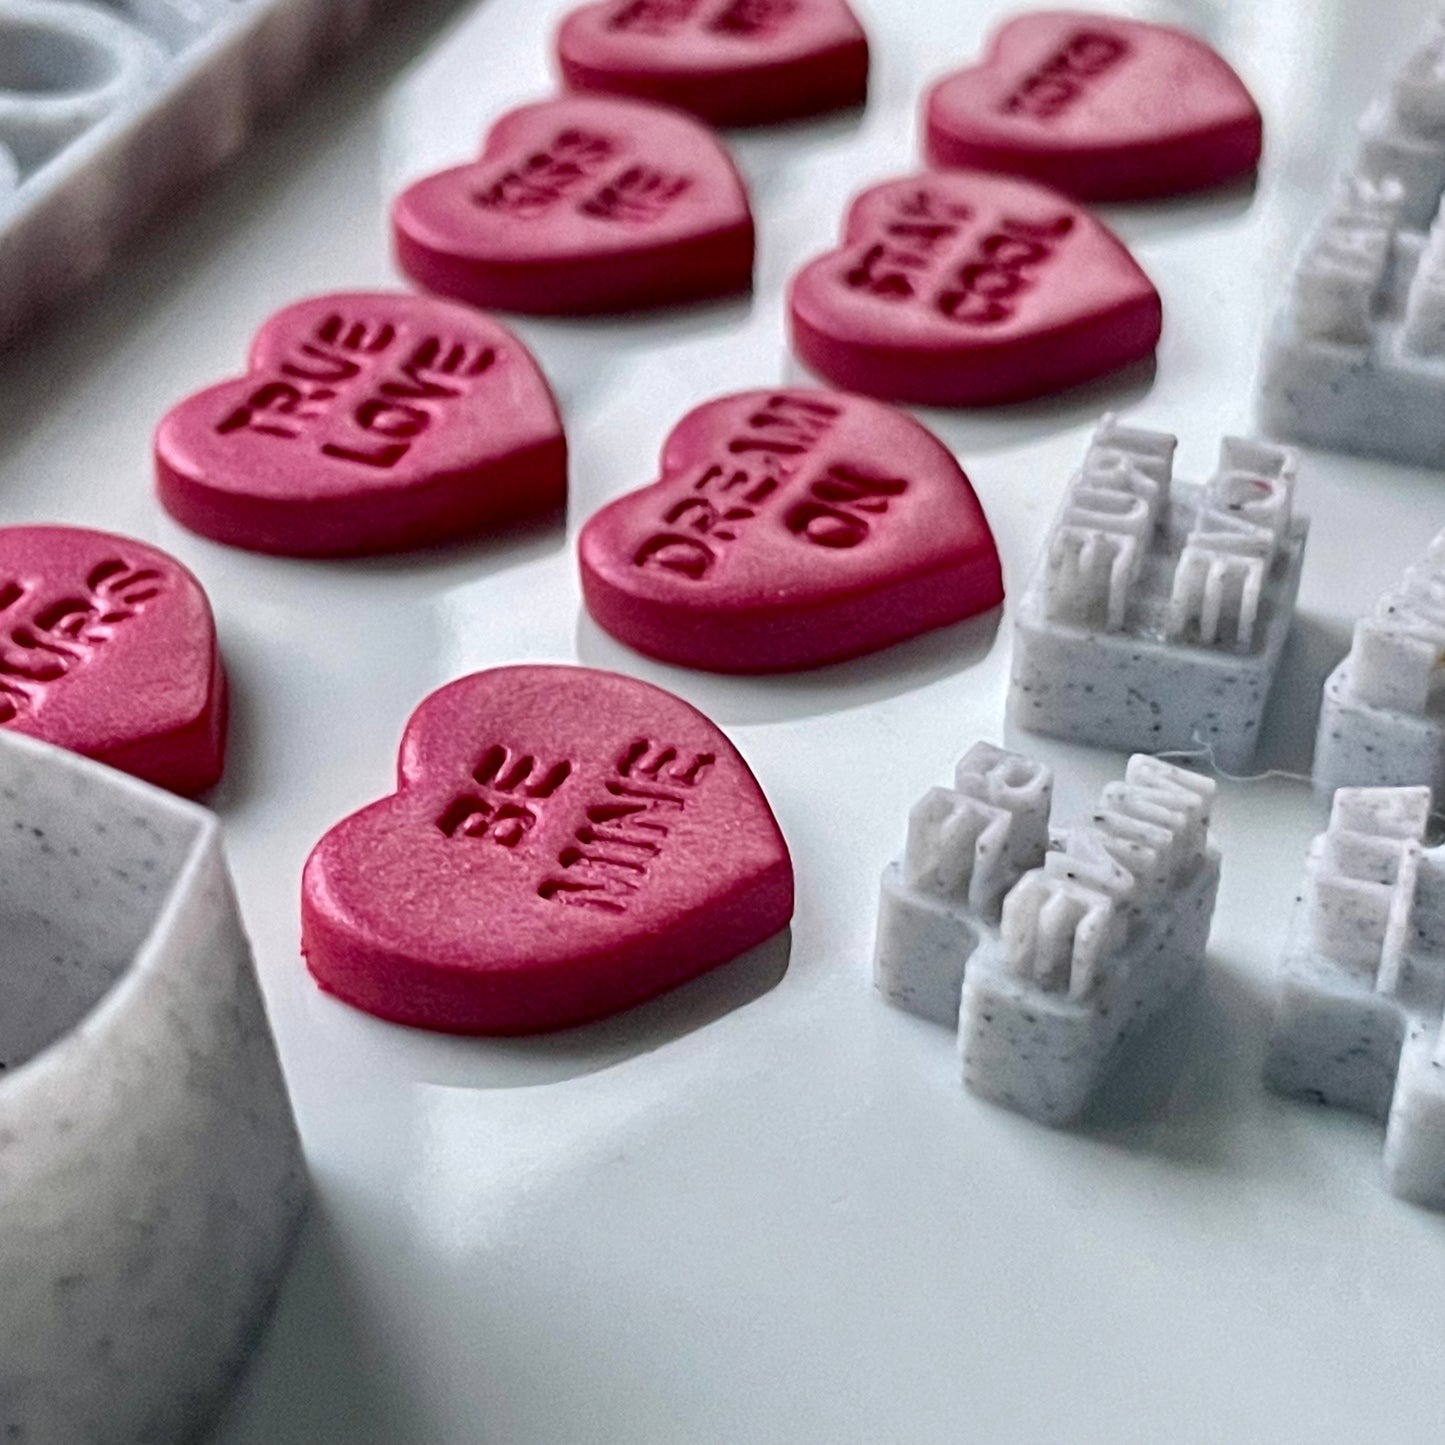 Word heart stamp set with matching cutter - made for use with polymer clay